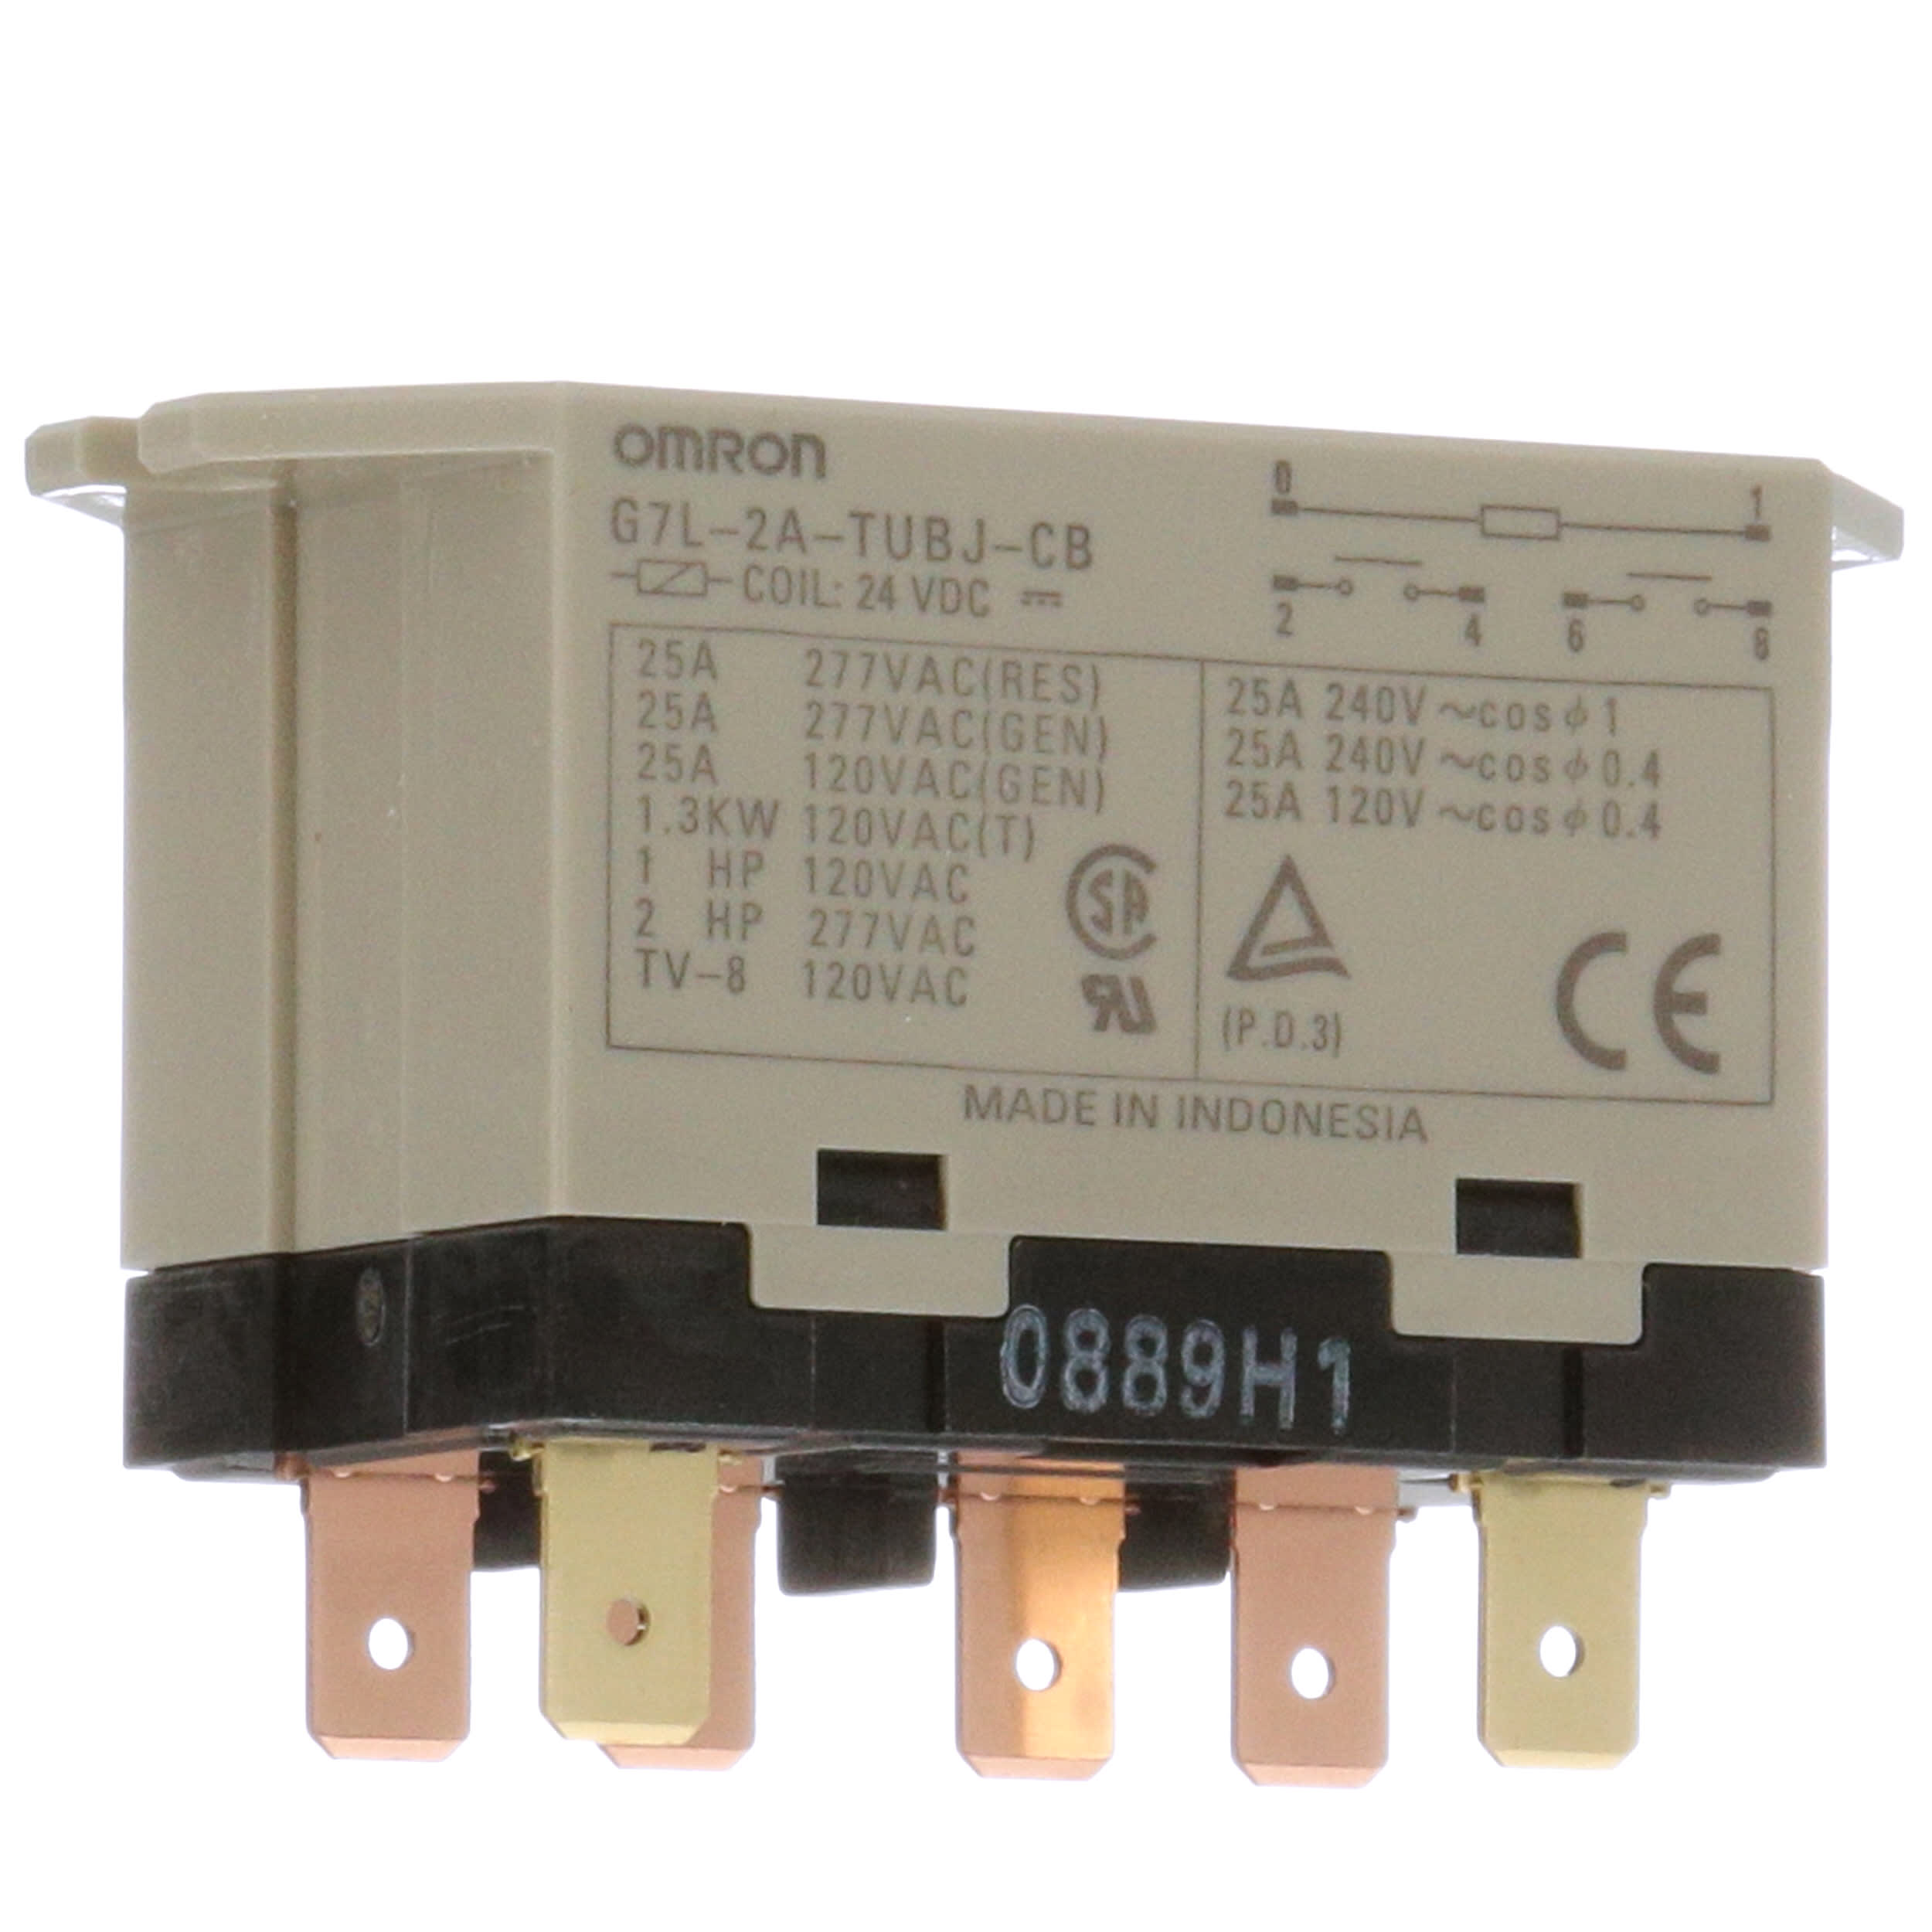 OMRON G7L-2A-BUBJ-CB 24VDC General Purpose Relay with Test Button NEW Open Box 